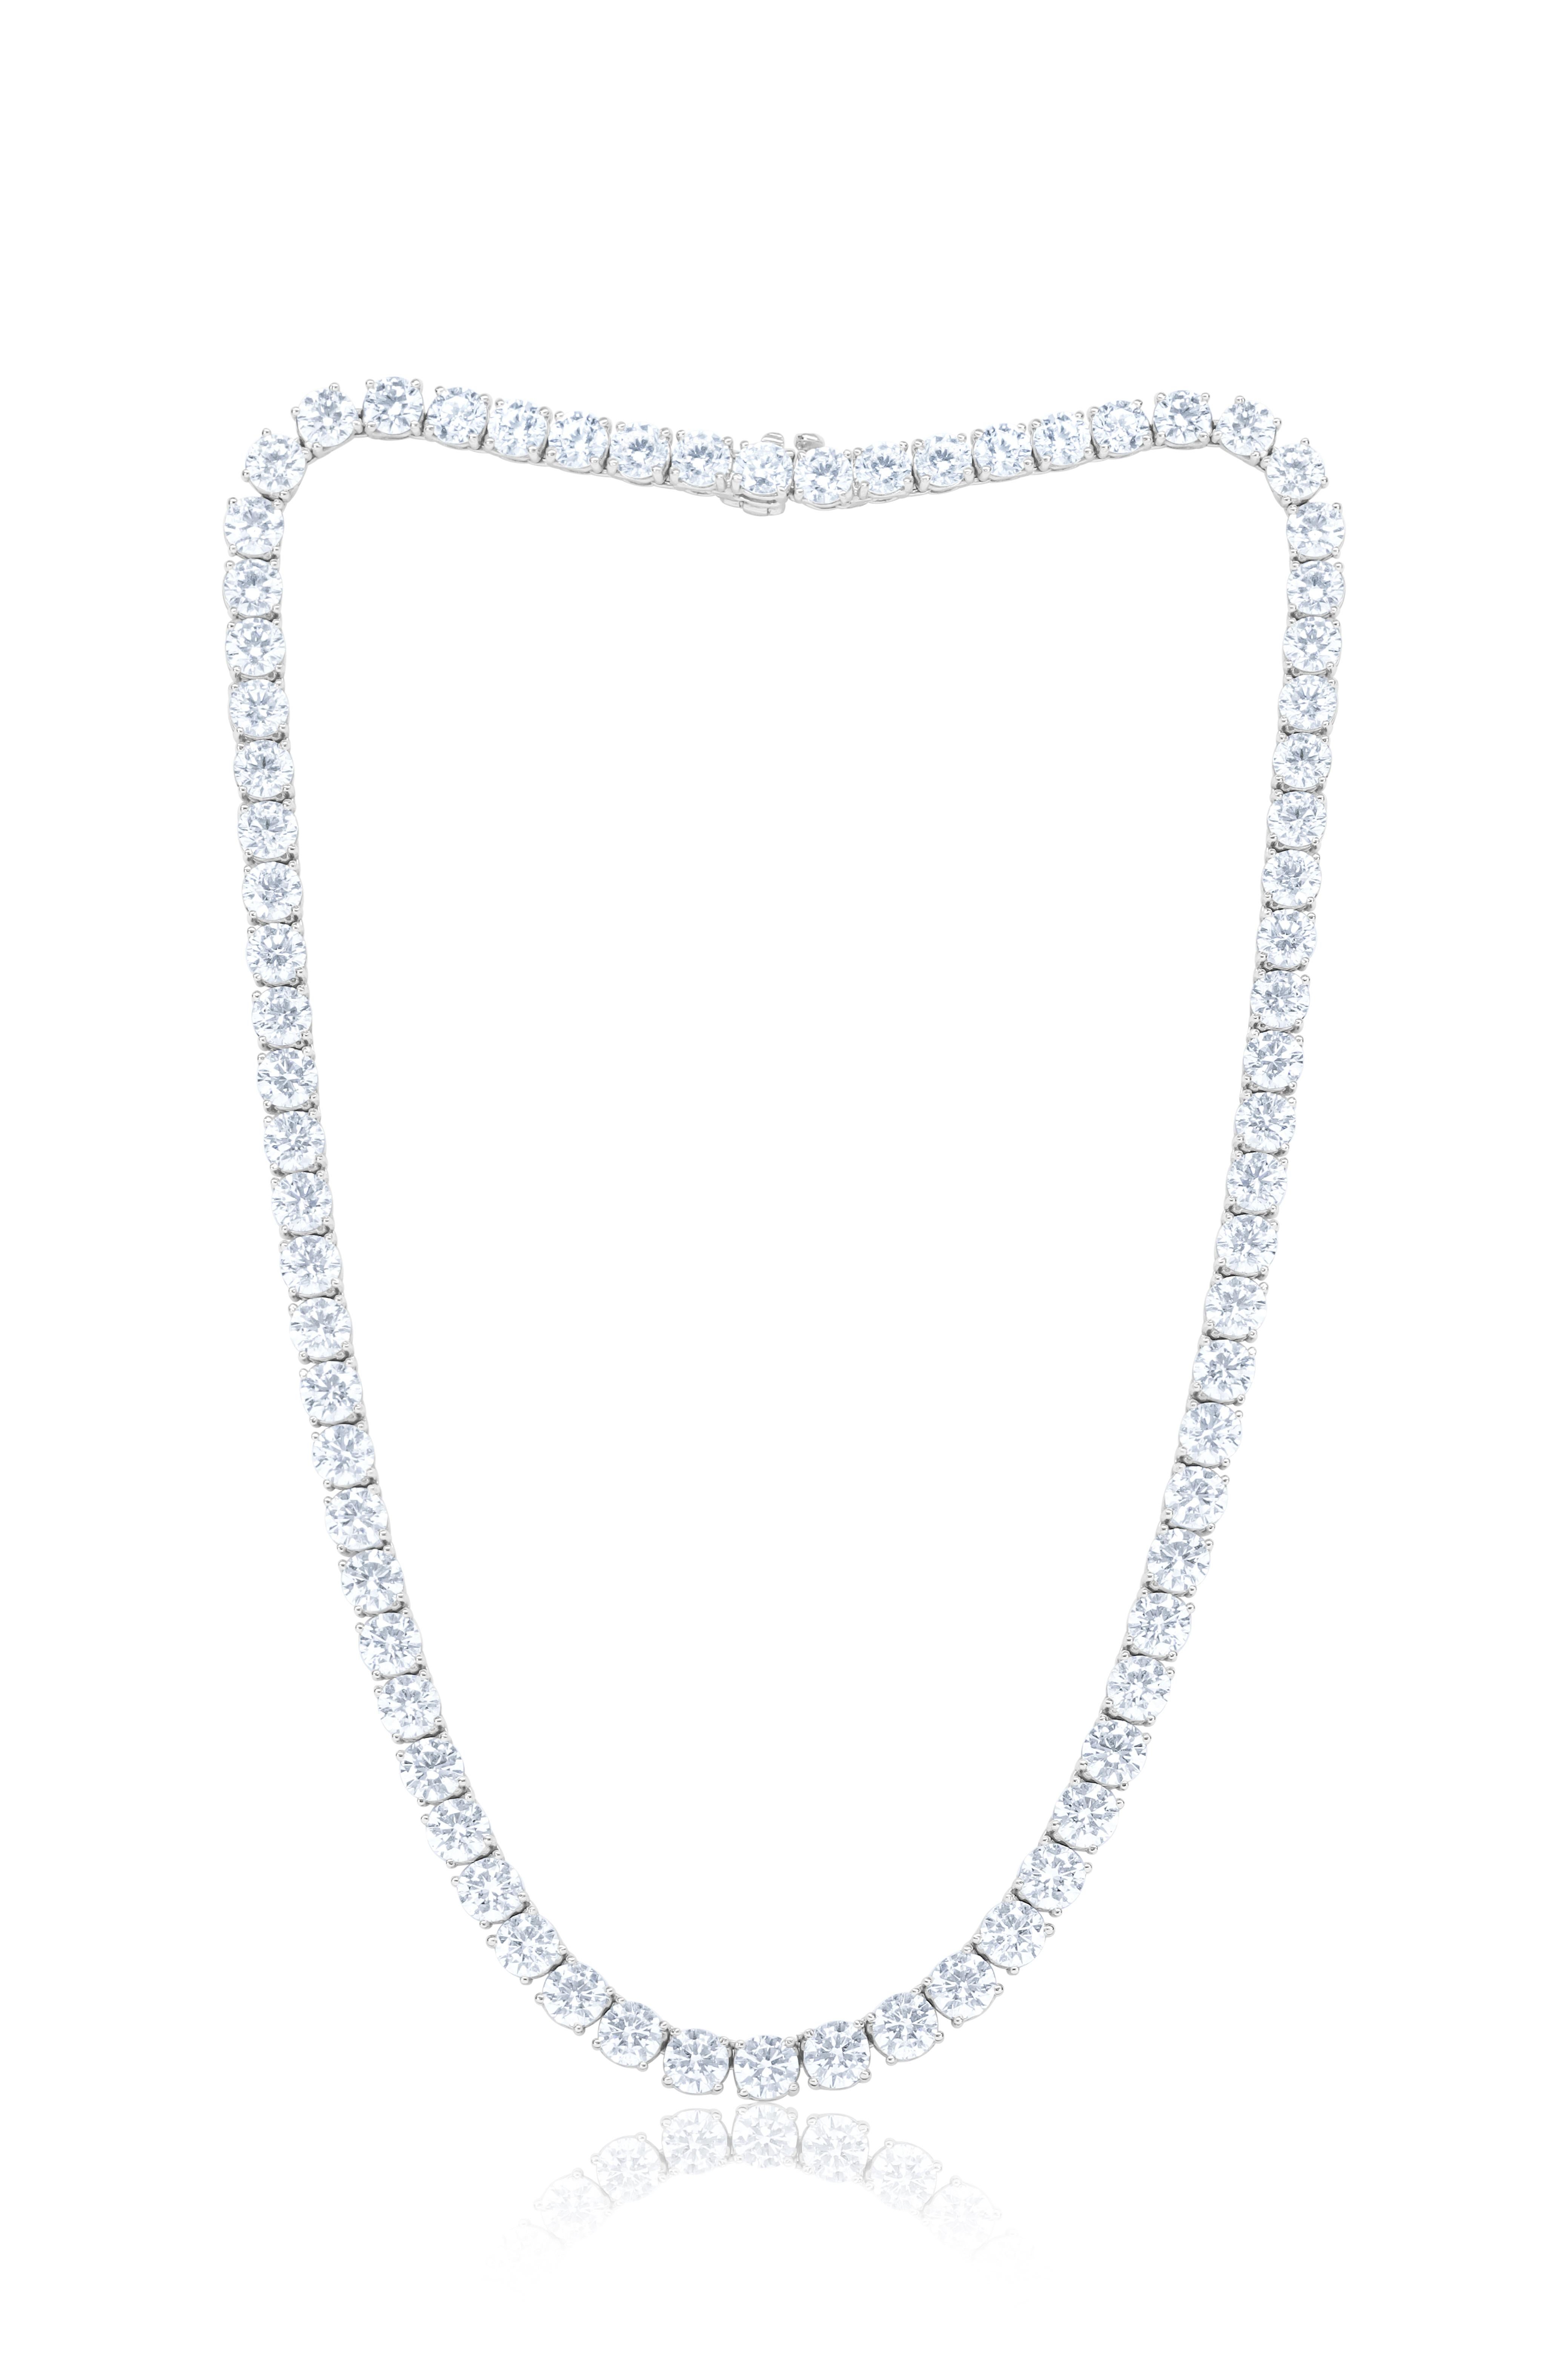 Modern Diana M. Custom 34cts Diamond Tennis Necklace 4-prong FG SI  For Sale